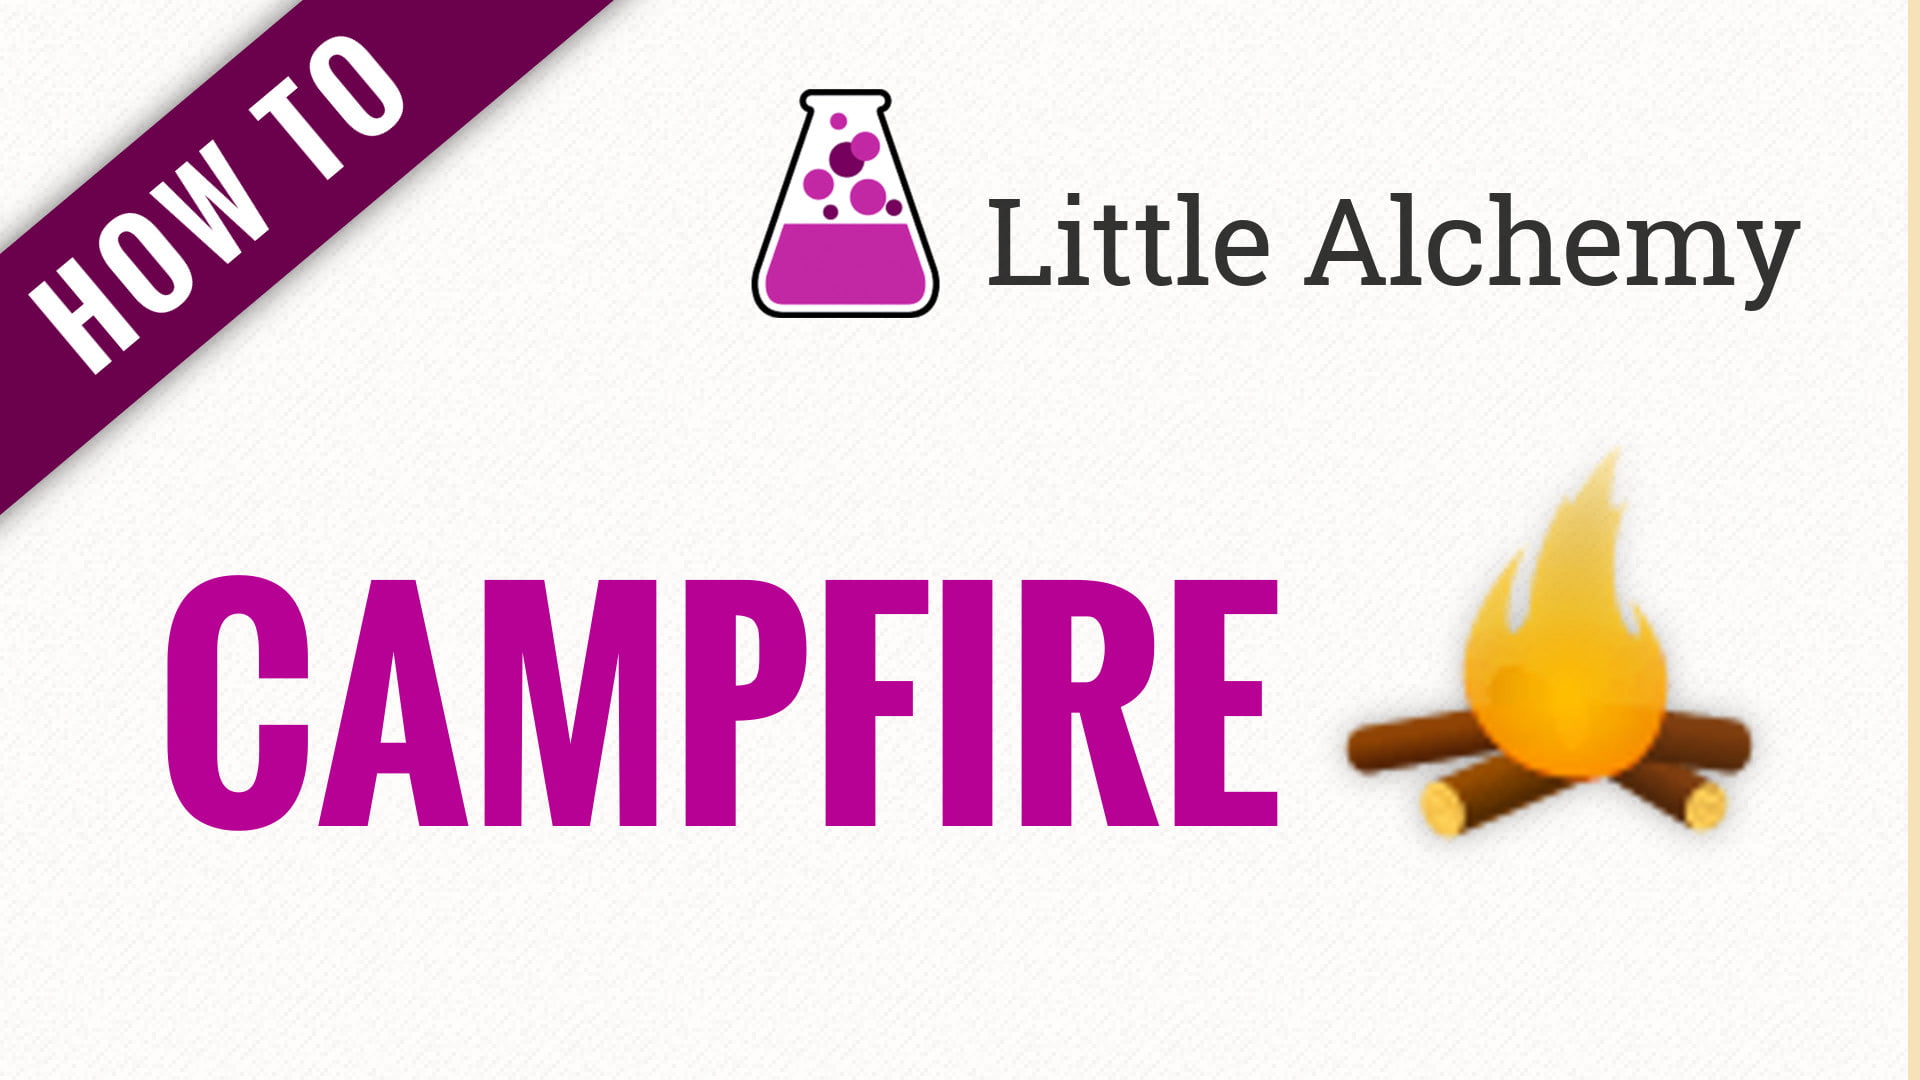 How to Make Campfire in Little Alchemy 1